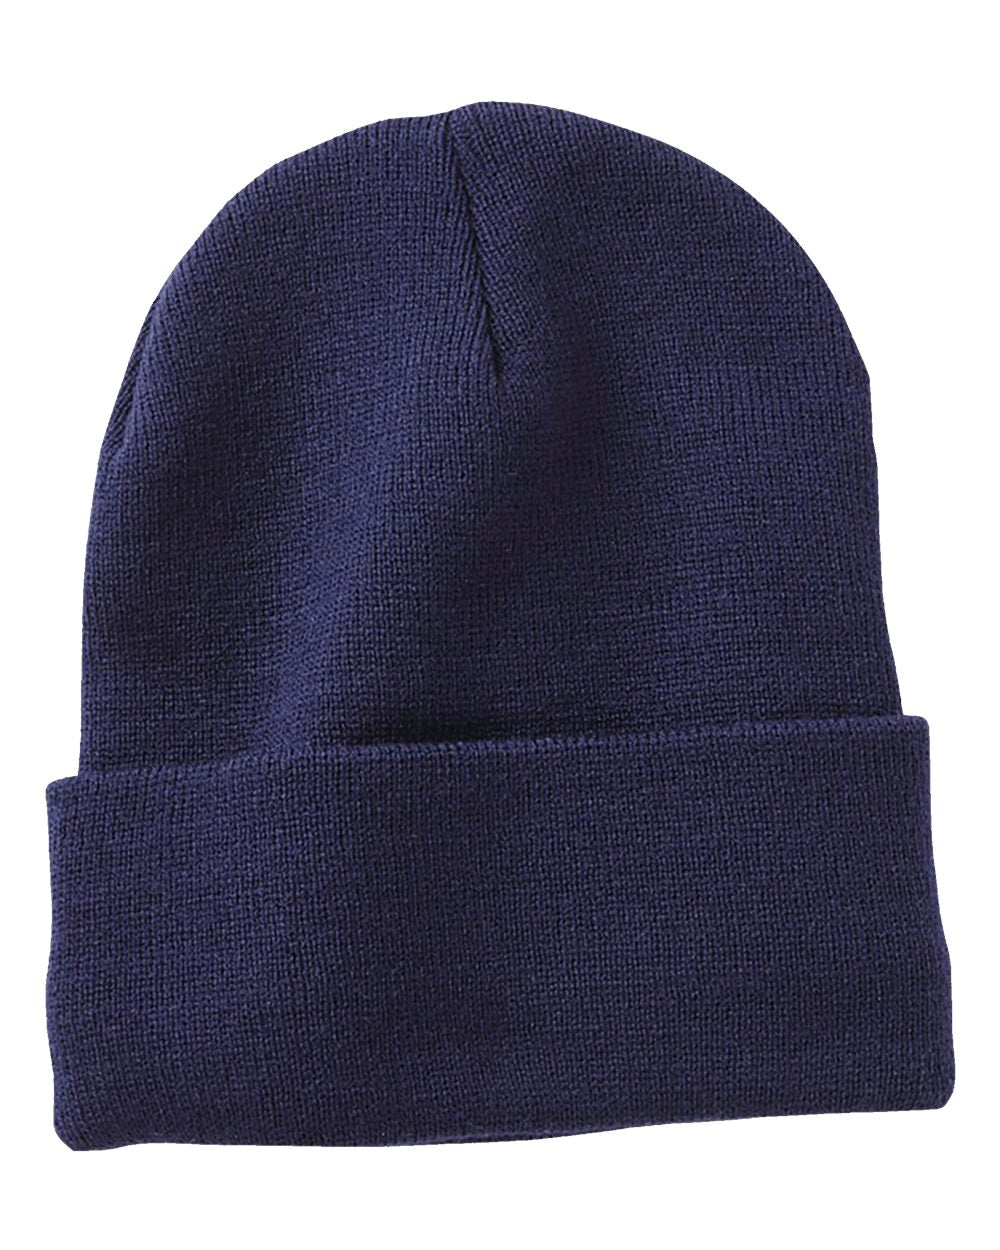 Sportsman Sherpa Lined 12" Cuffed Beanie SP12SL #color_Navy